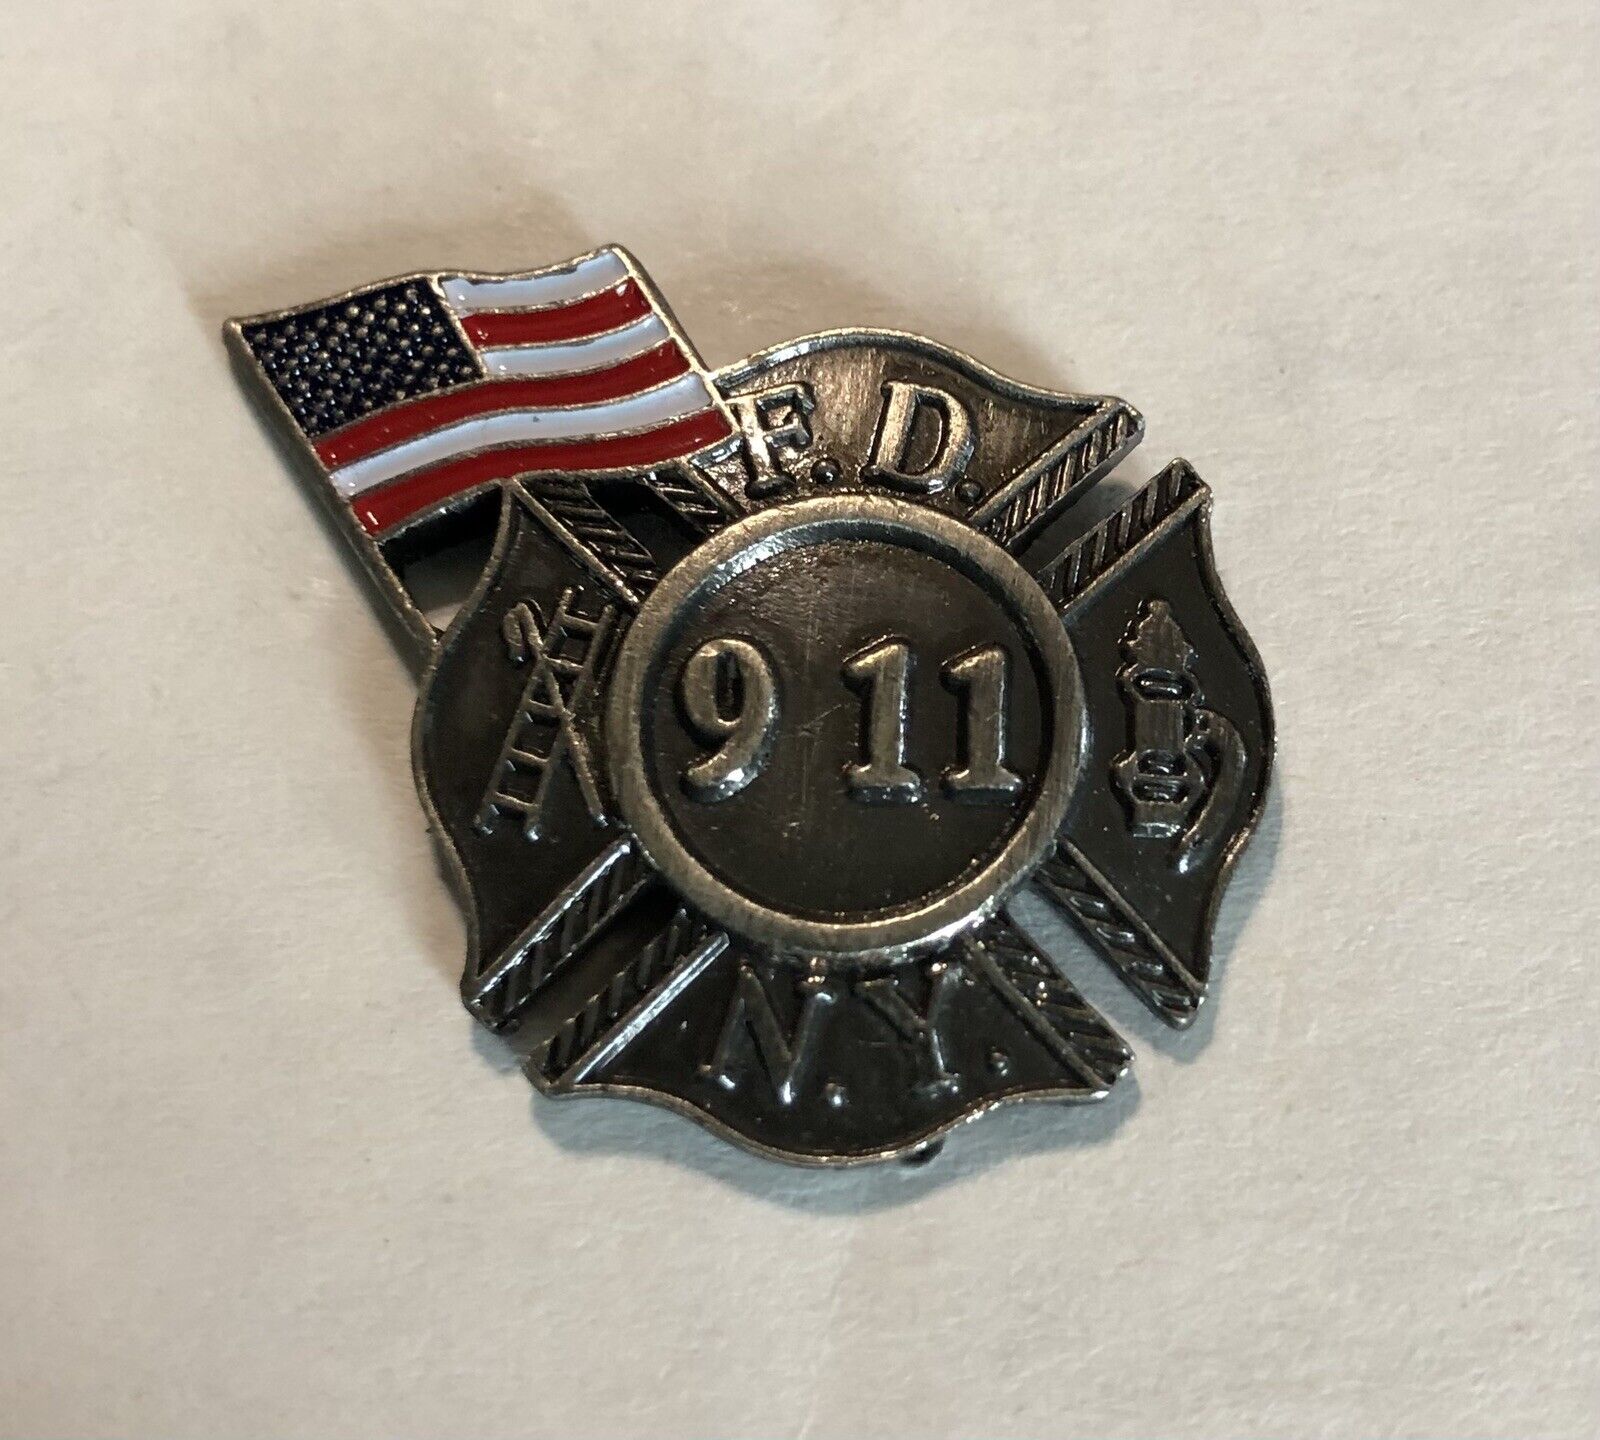 Vintage - New York Fire Department 9 11 memorial pin W/flag